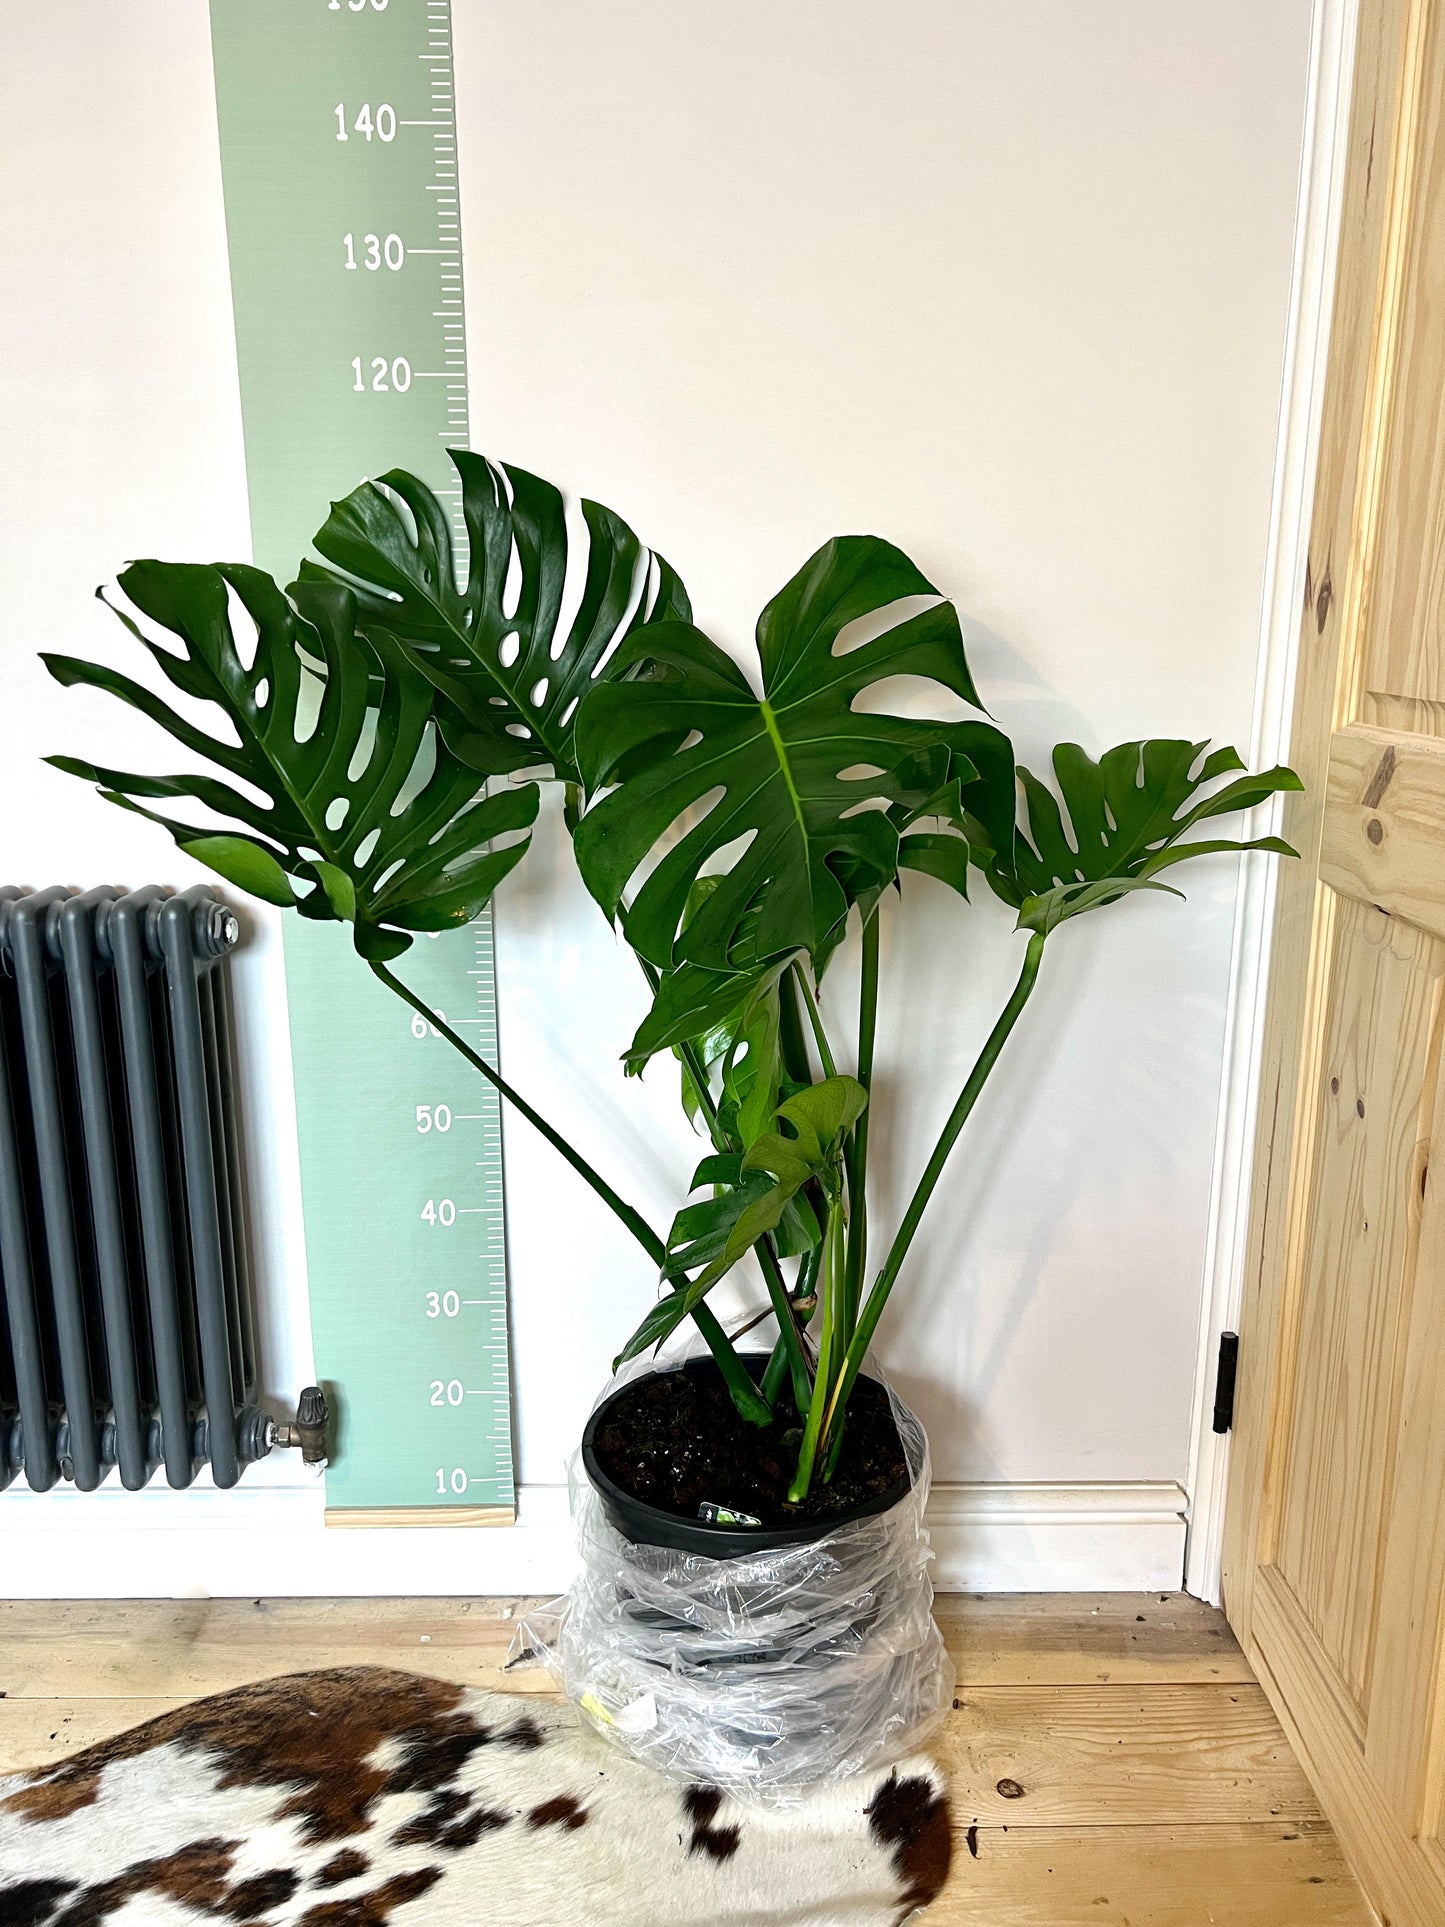 110cm Monstera Deliciosa (Swiss Cheese Plant) Large Form